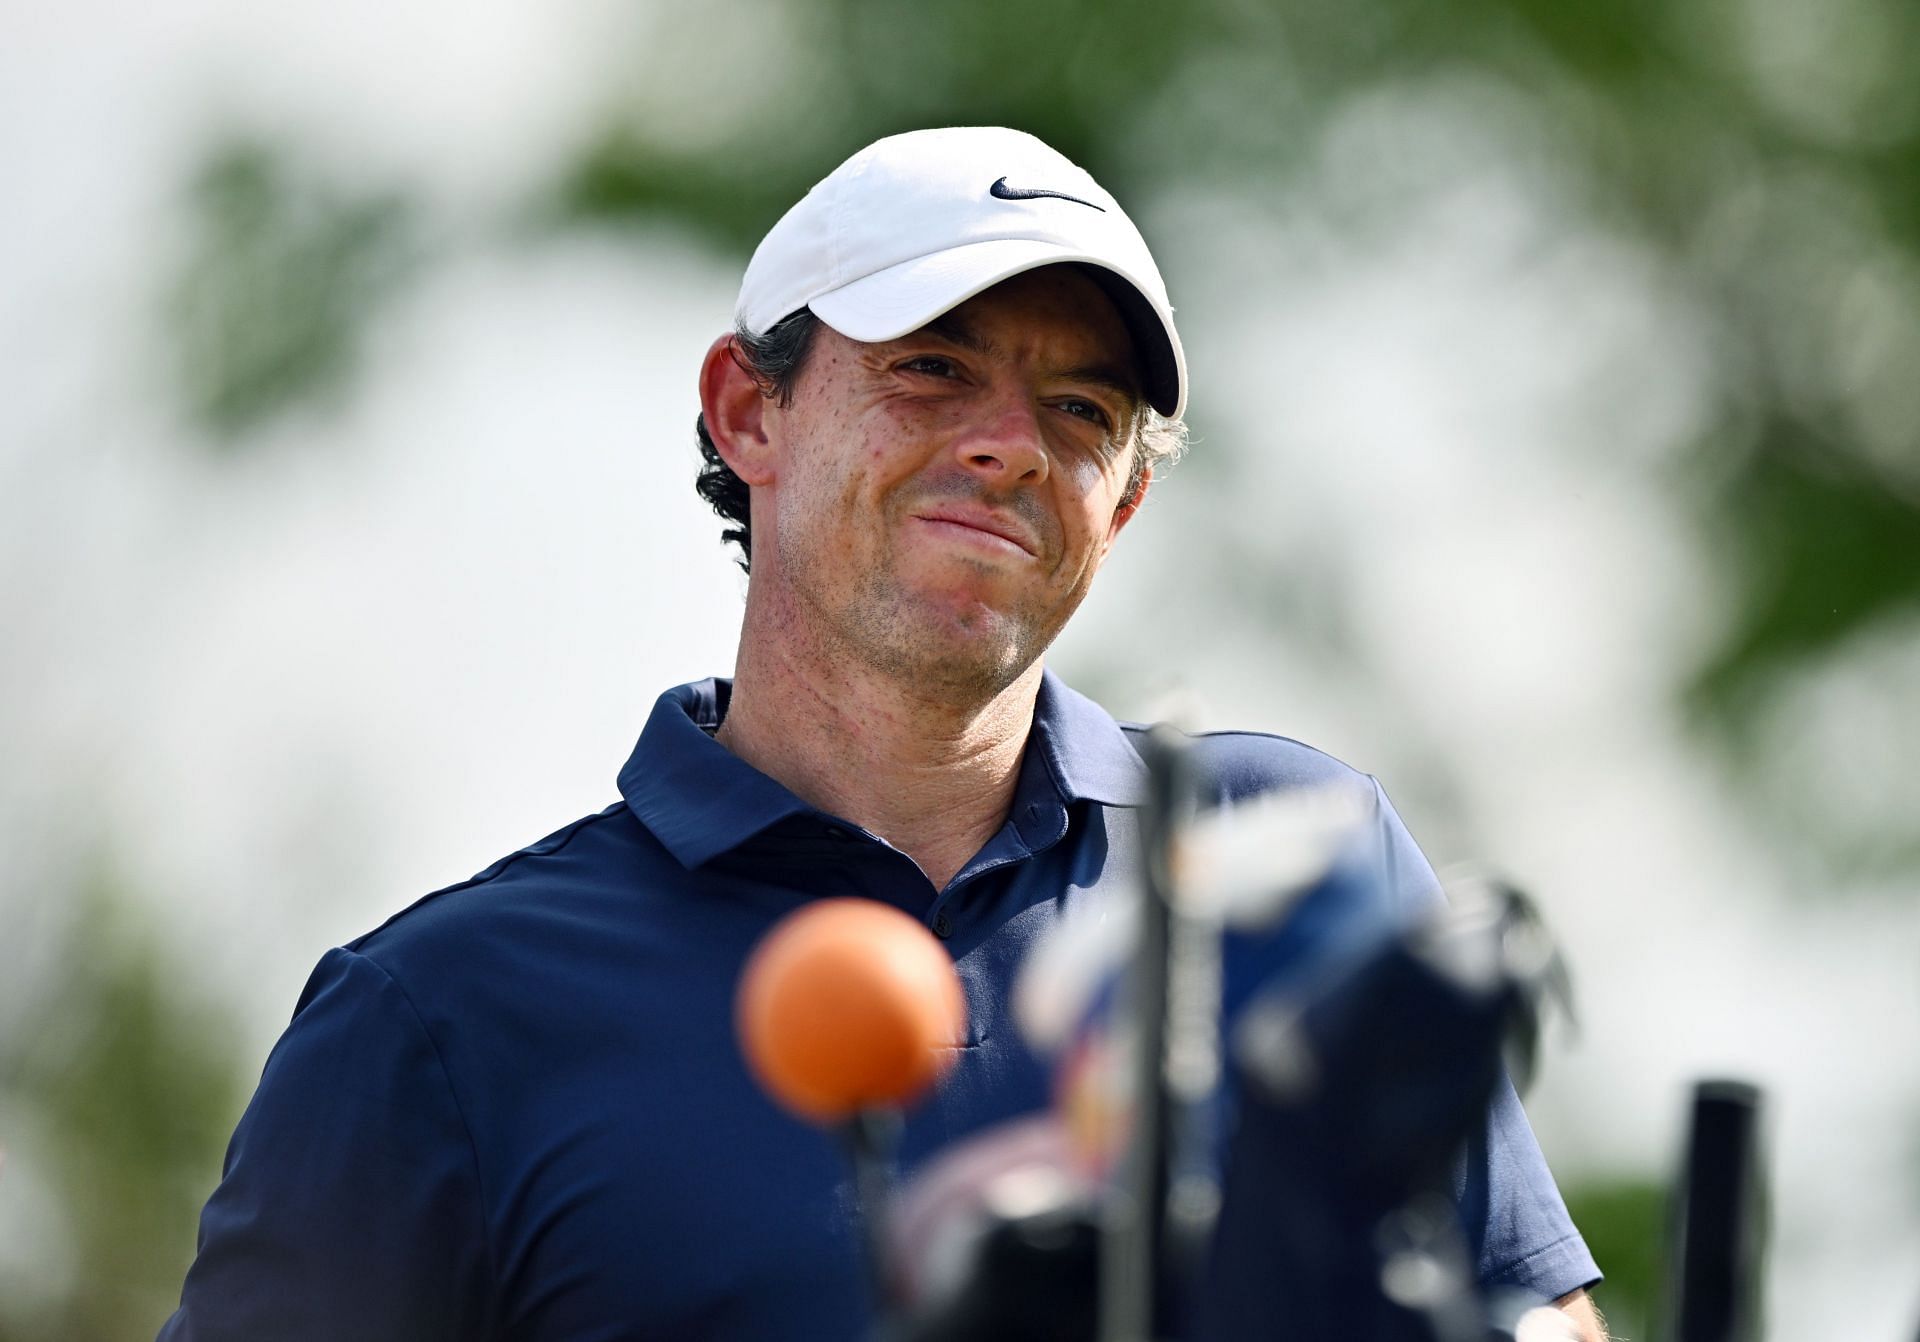 “It's really that back nine you need to take advantage of” McIlroy